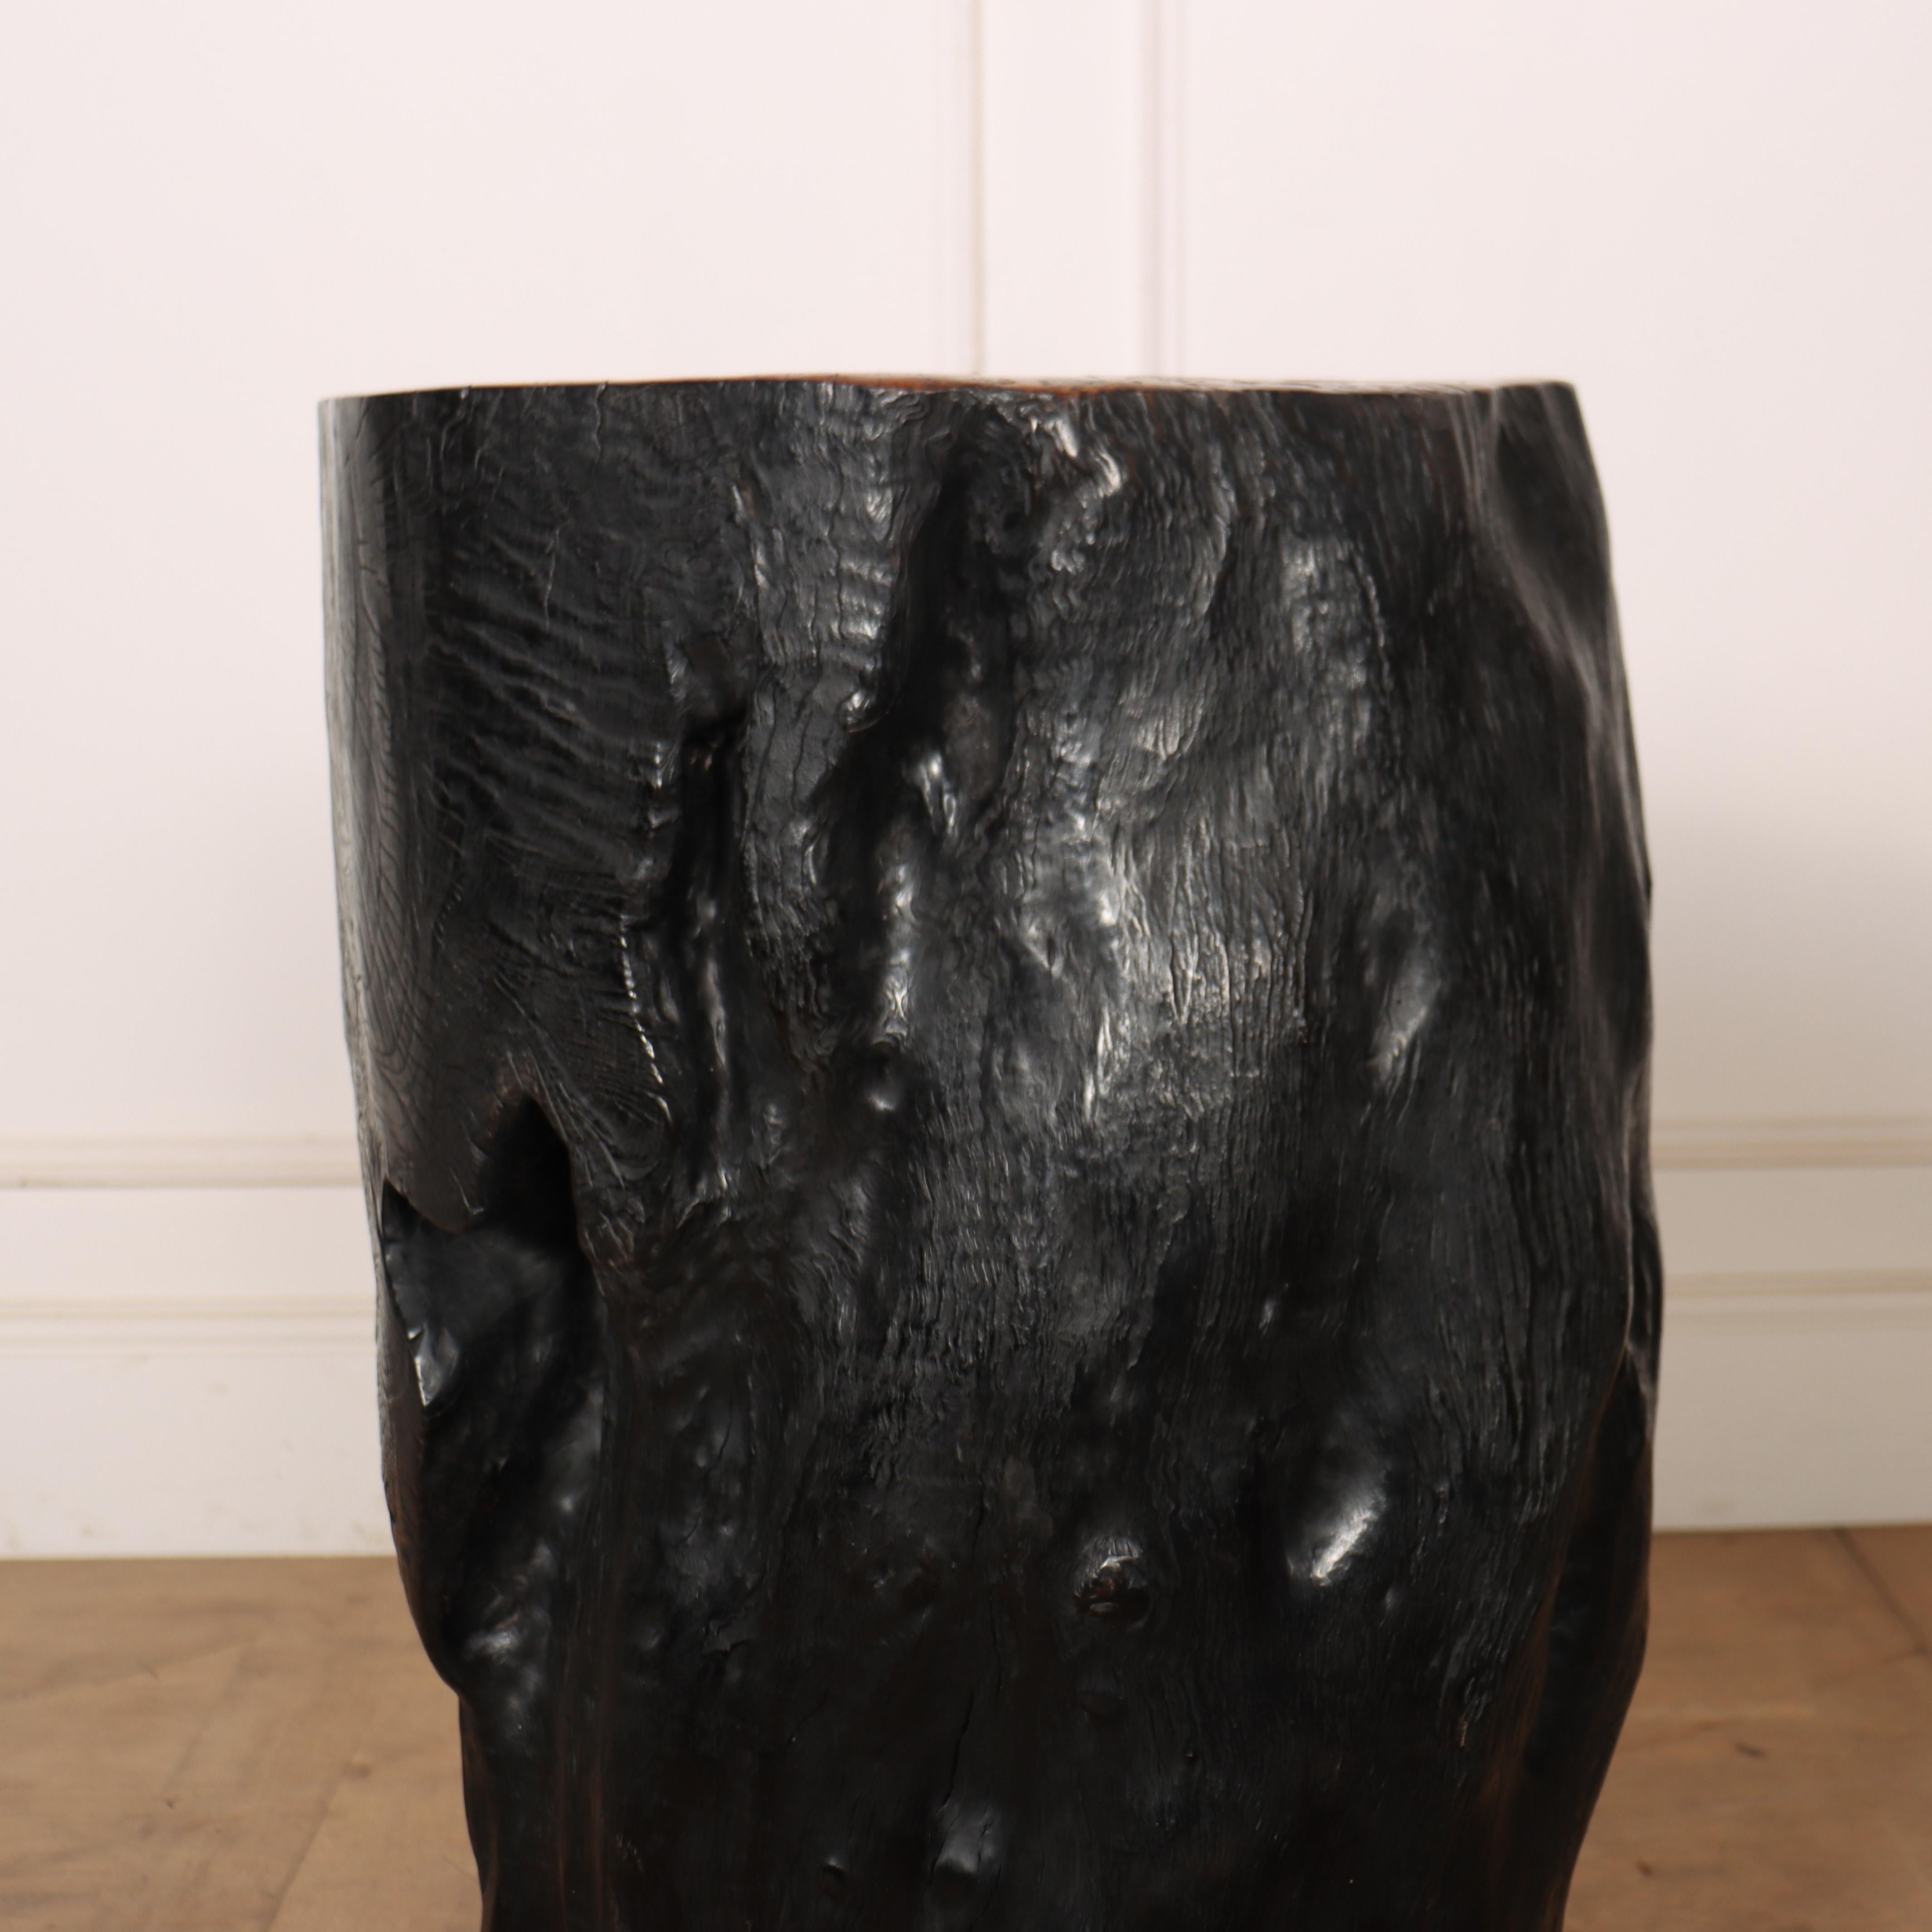 Primitive lychee side table. Hand carved and finished using a Japanese technique called Shou-Sugi Ban.

Reference: 8154

Dimensions
18 inches (46 cms) Wide
14 inches (36 cms) Deep
29 inches (74 cms) High